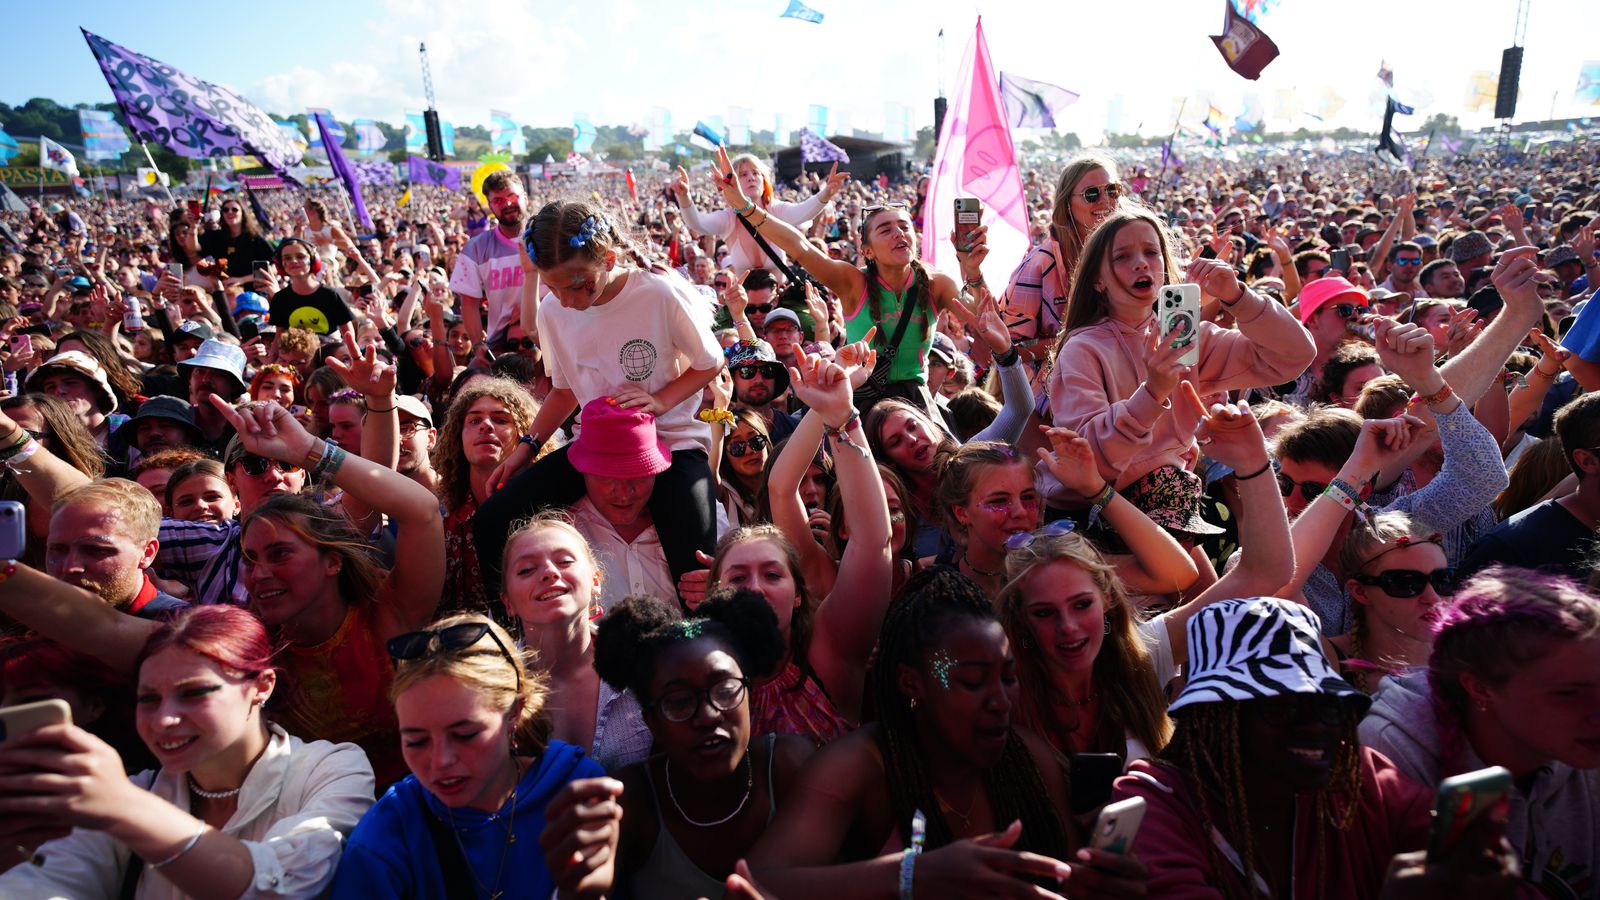 Scores of Glastonbury revellers test positive for COVID as experts warn of fifth wave